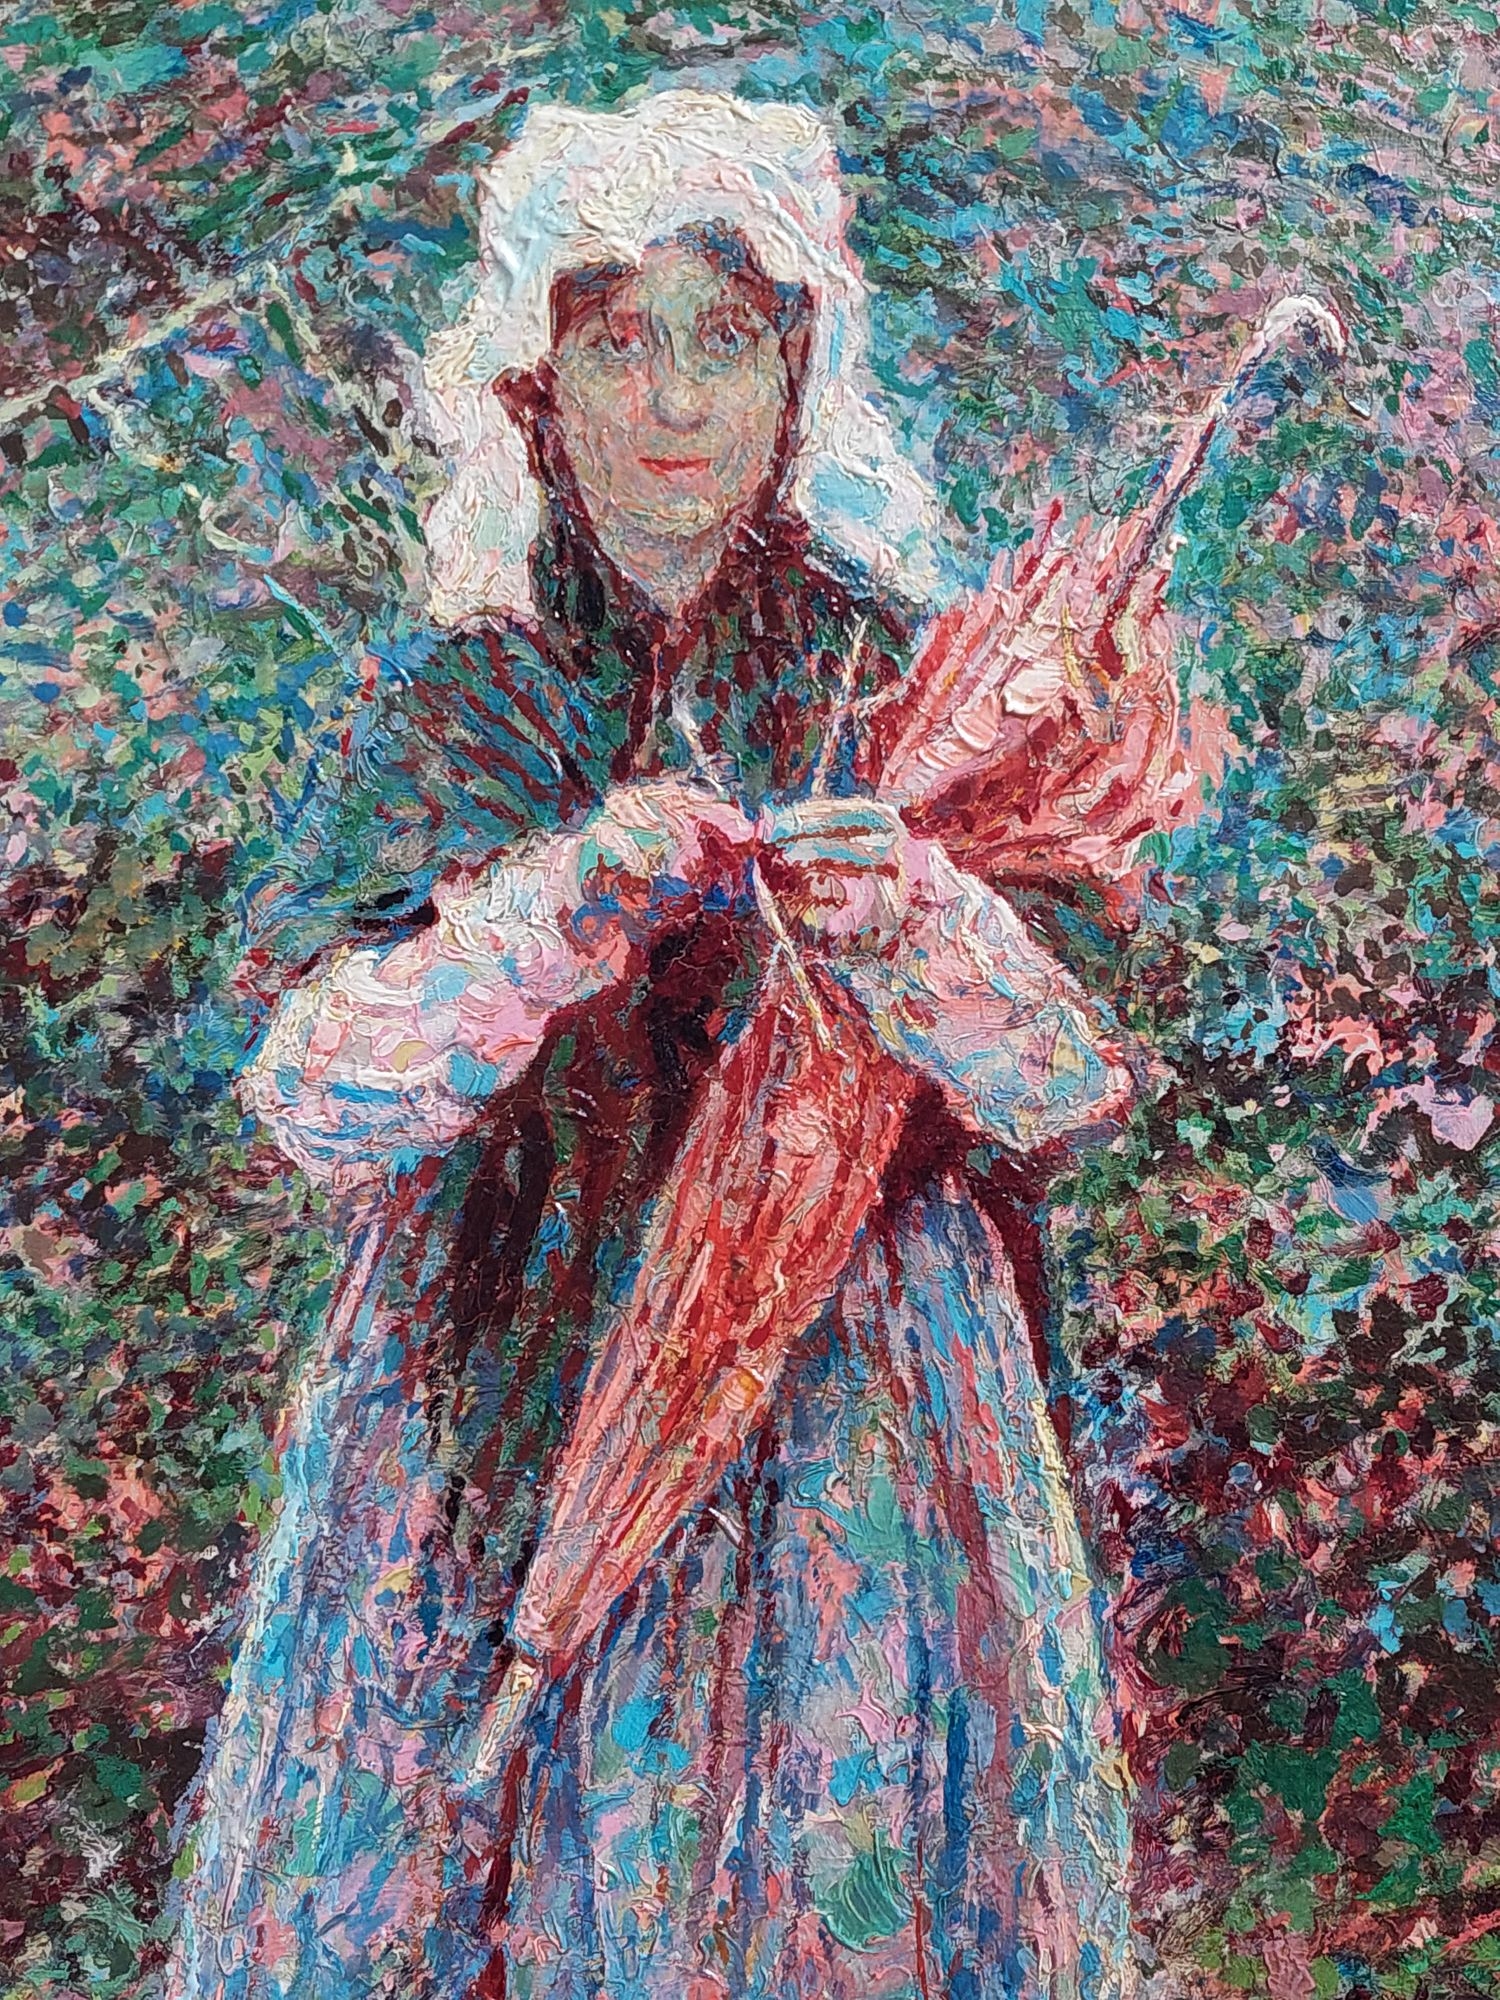 Artwork by Umberto Boccioni, PORTRAIT OF A GIRL, Made of oil on canvas